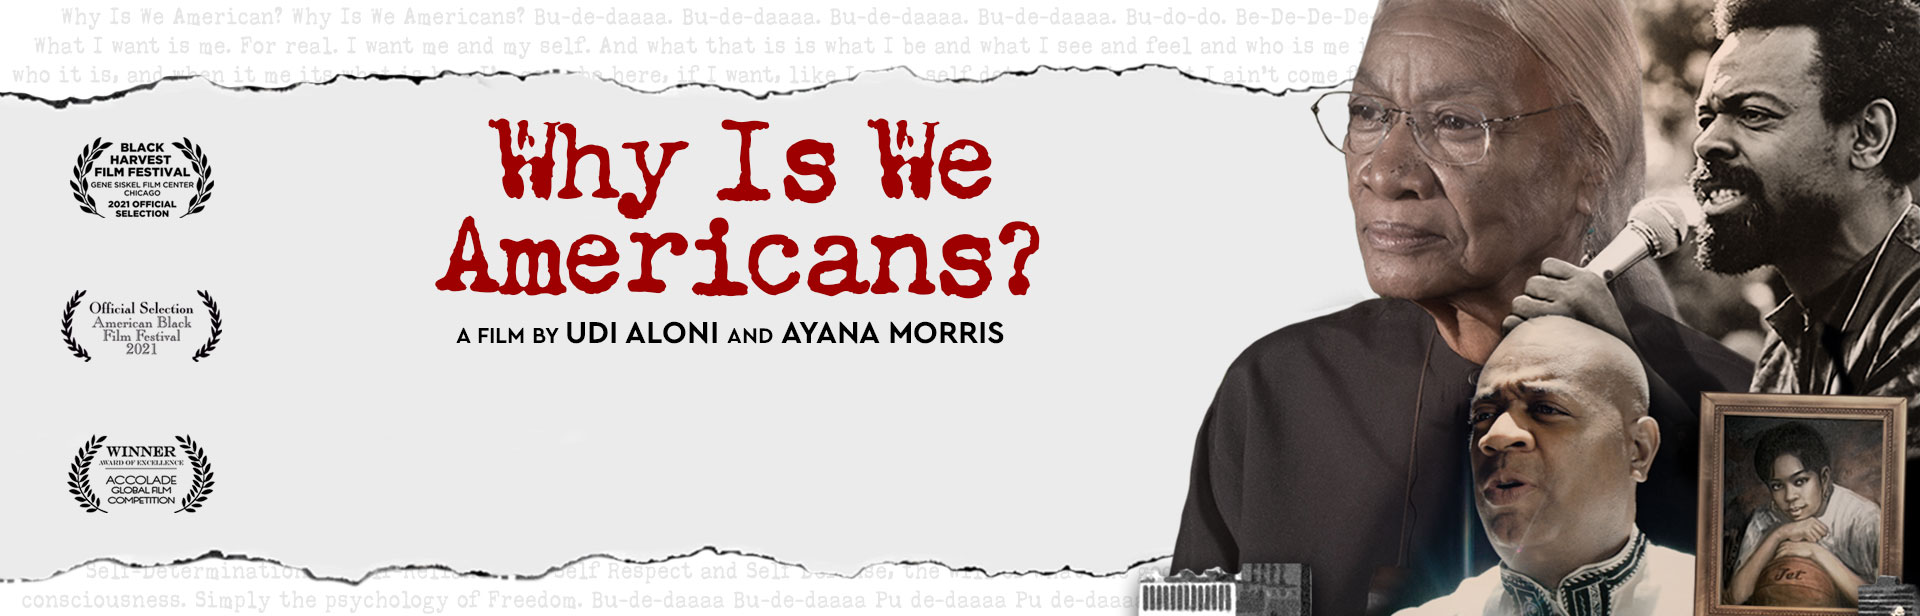 Why Is We Americans? banner